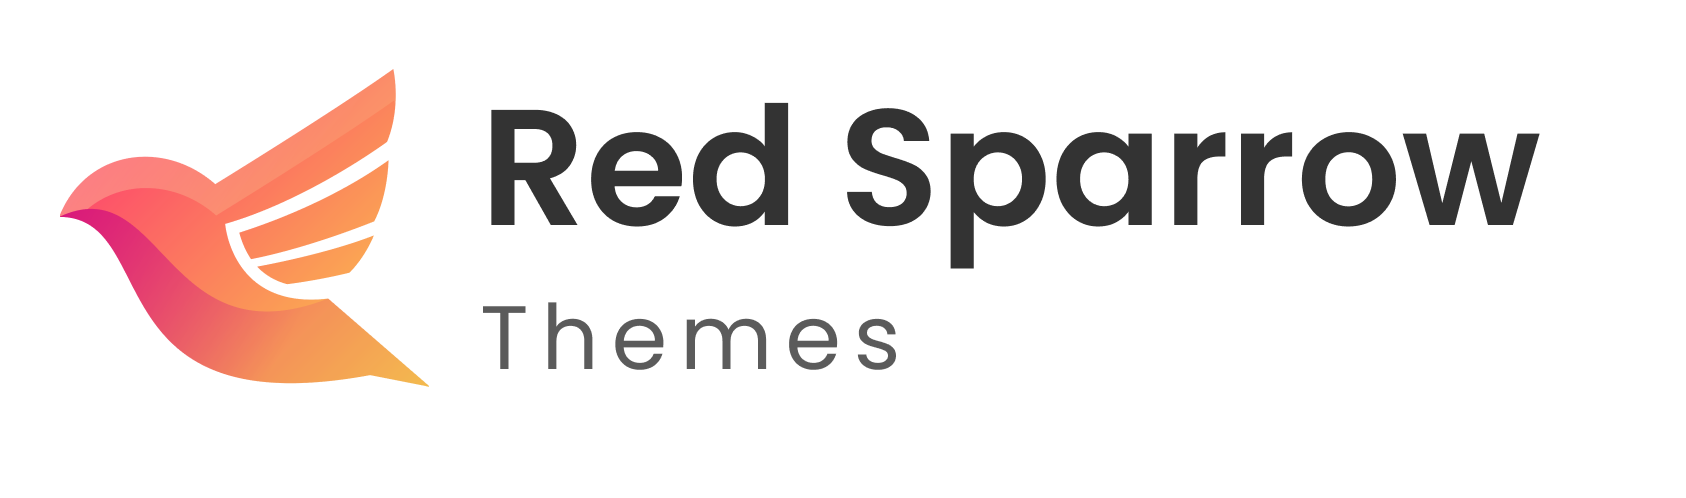 Red Sparrow Themes Logo